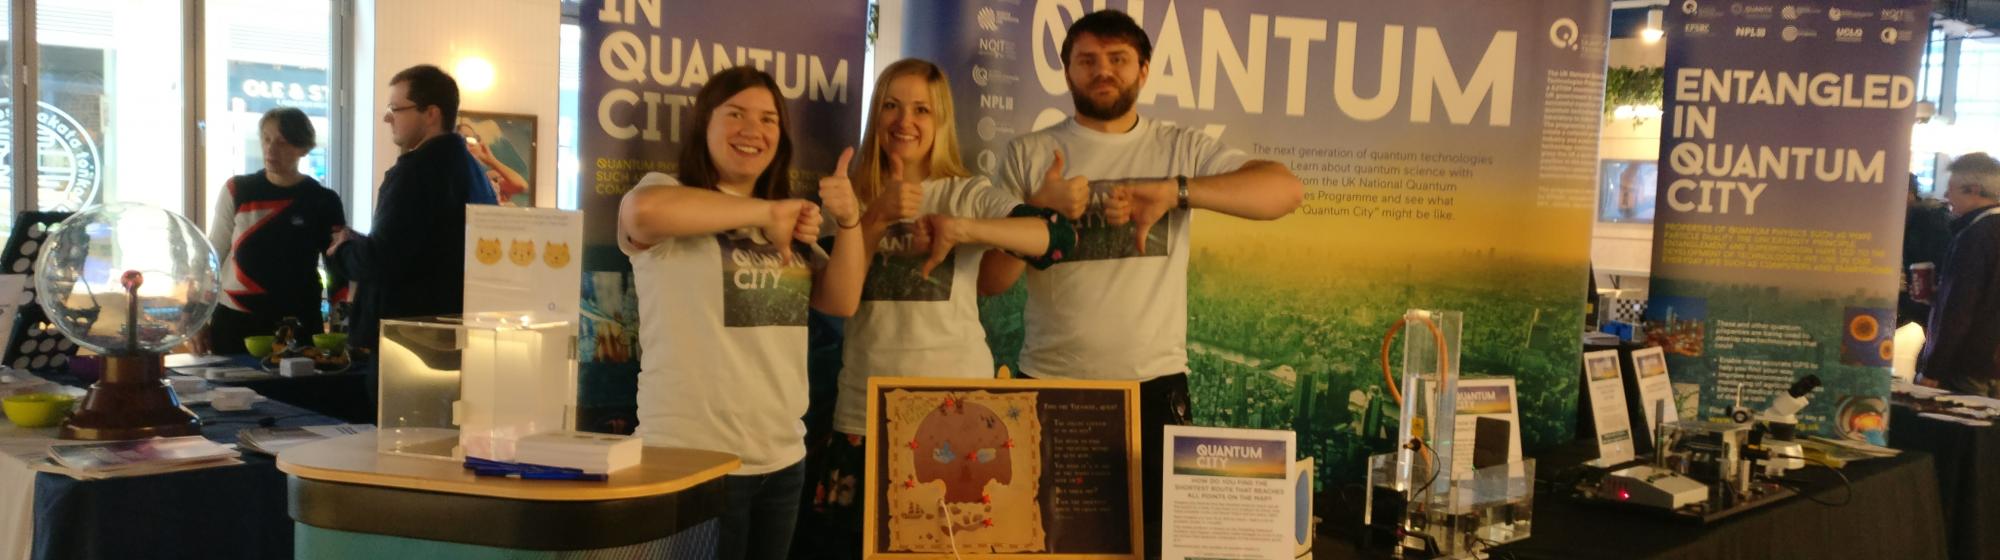 The Quantum City Team at IF Oxford